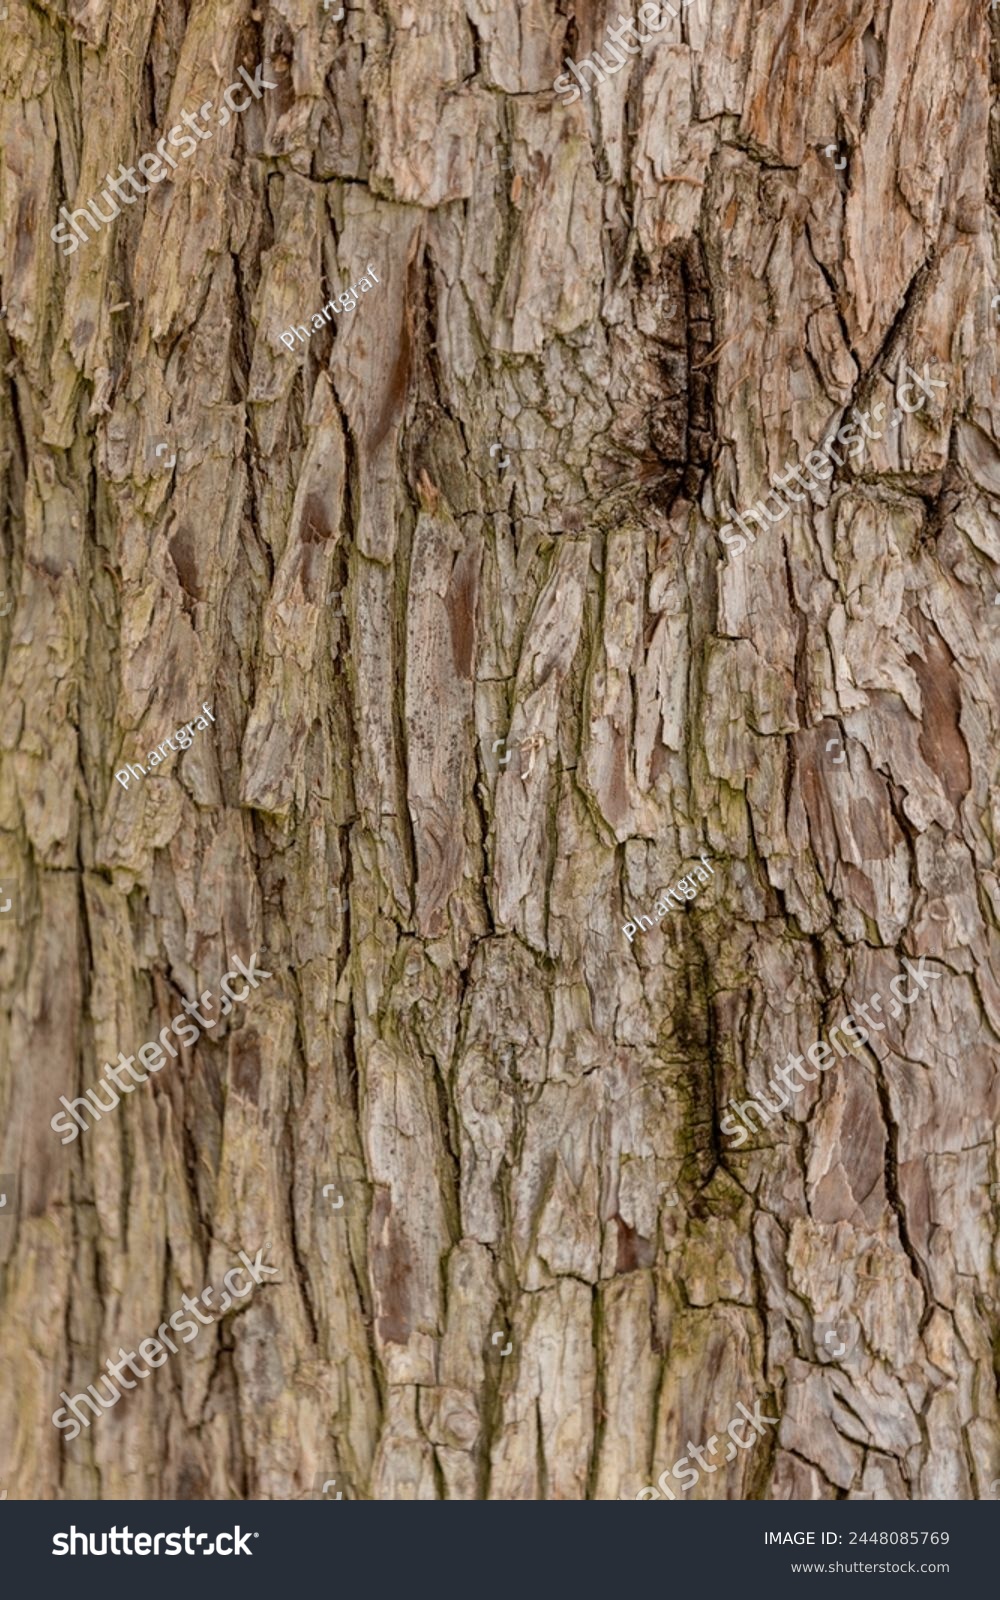 Bark pattern is seamless texture from tree. For background wood work, Bark of brown hardwood, thick bark hardwood, residential house wood. nature, trunk, tree, bark, hardwood,  #2448085769